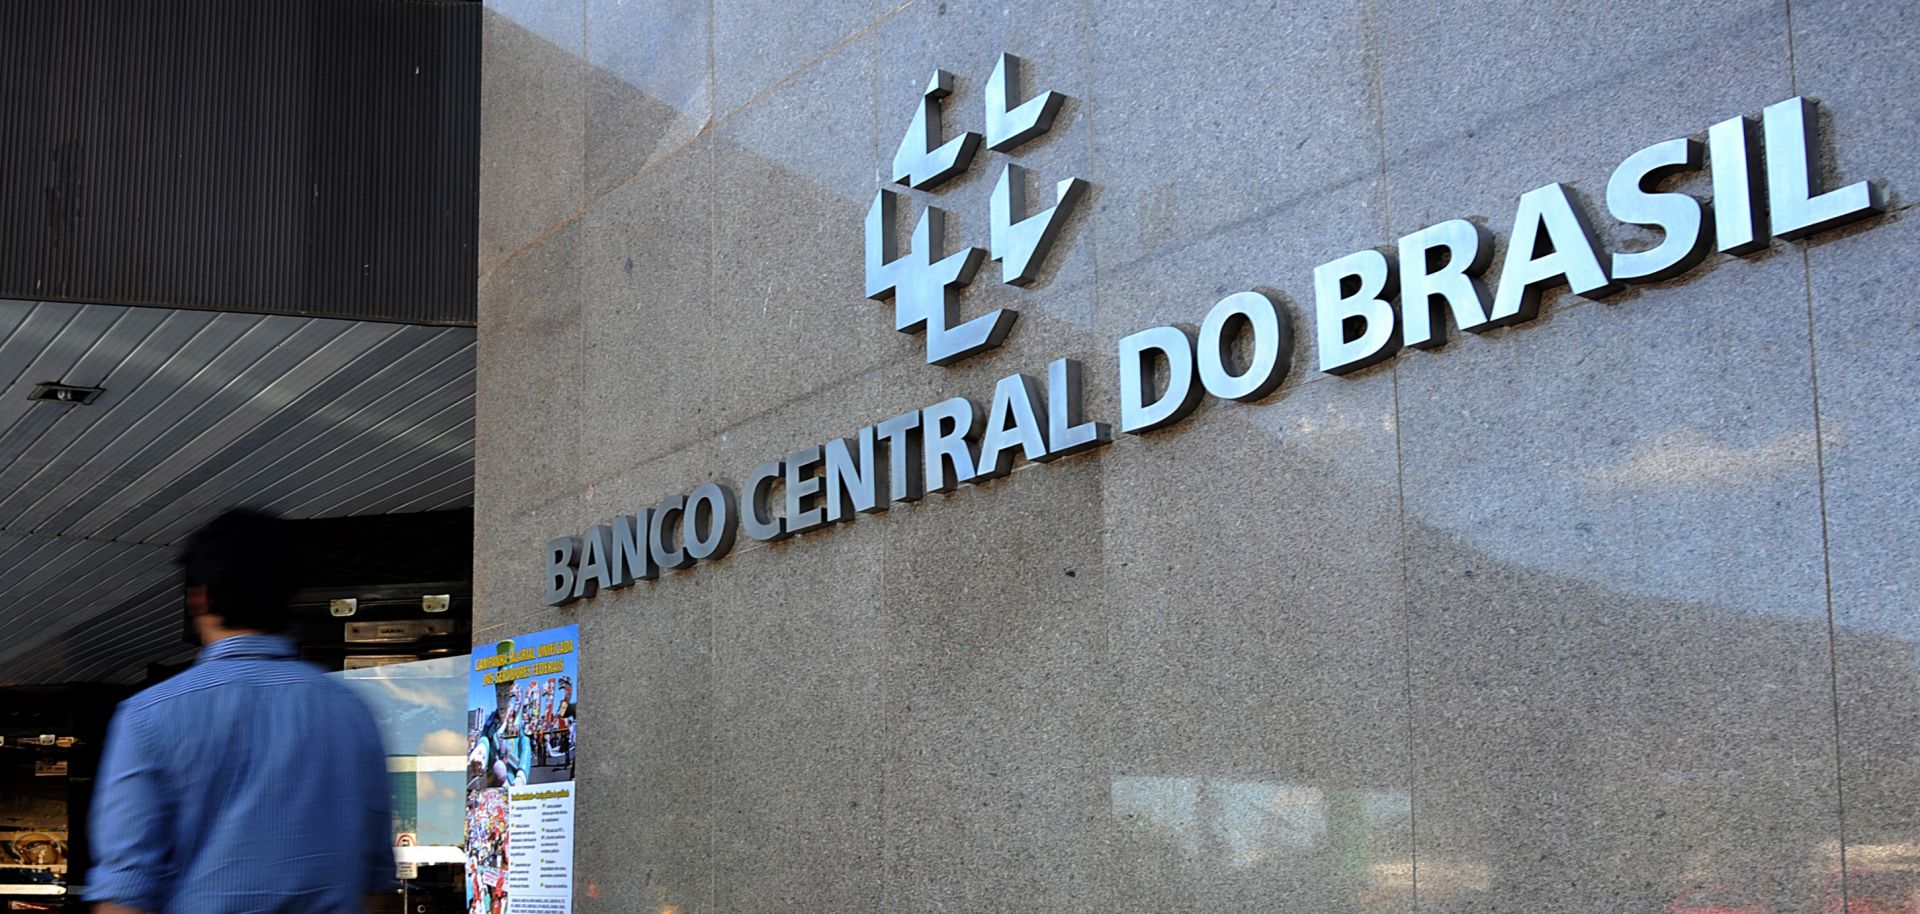 A man walks past the building of Brazil’s central bank in the capital of Brasilia on May 29, 2012.